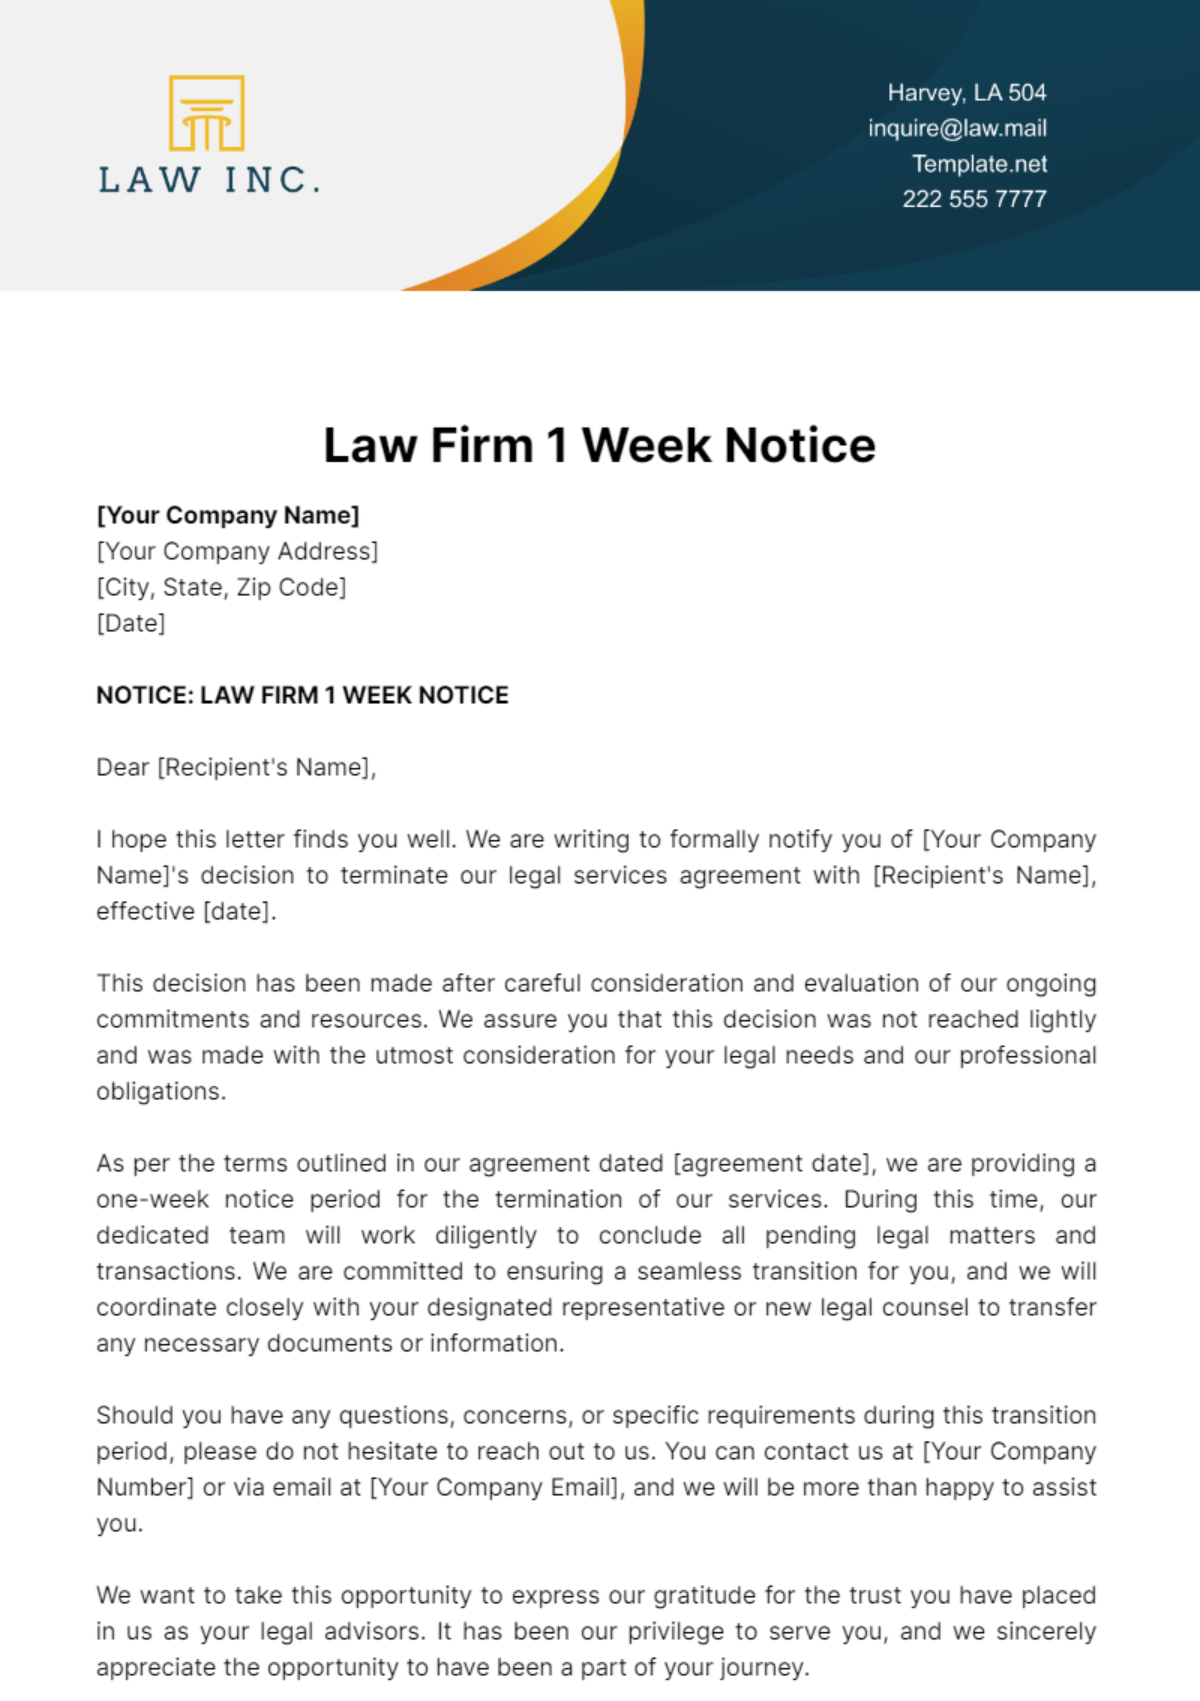 Free Law Firm 1 Week Notice Template